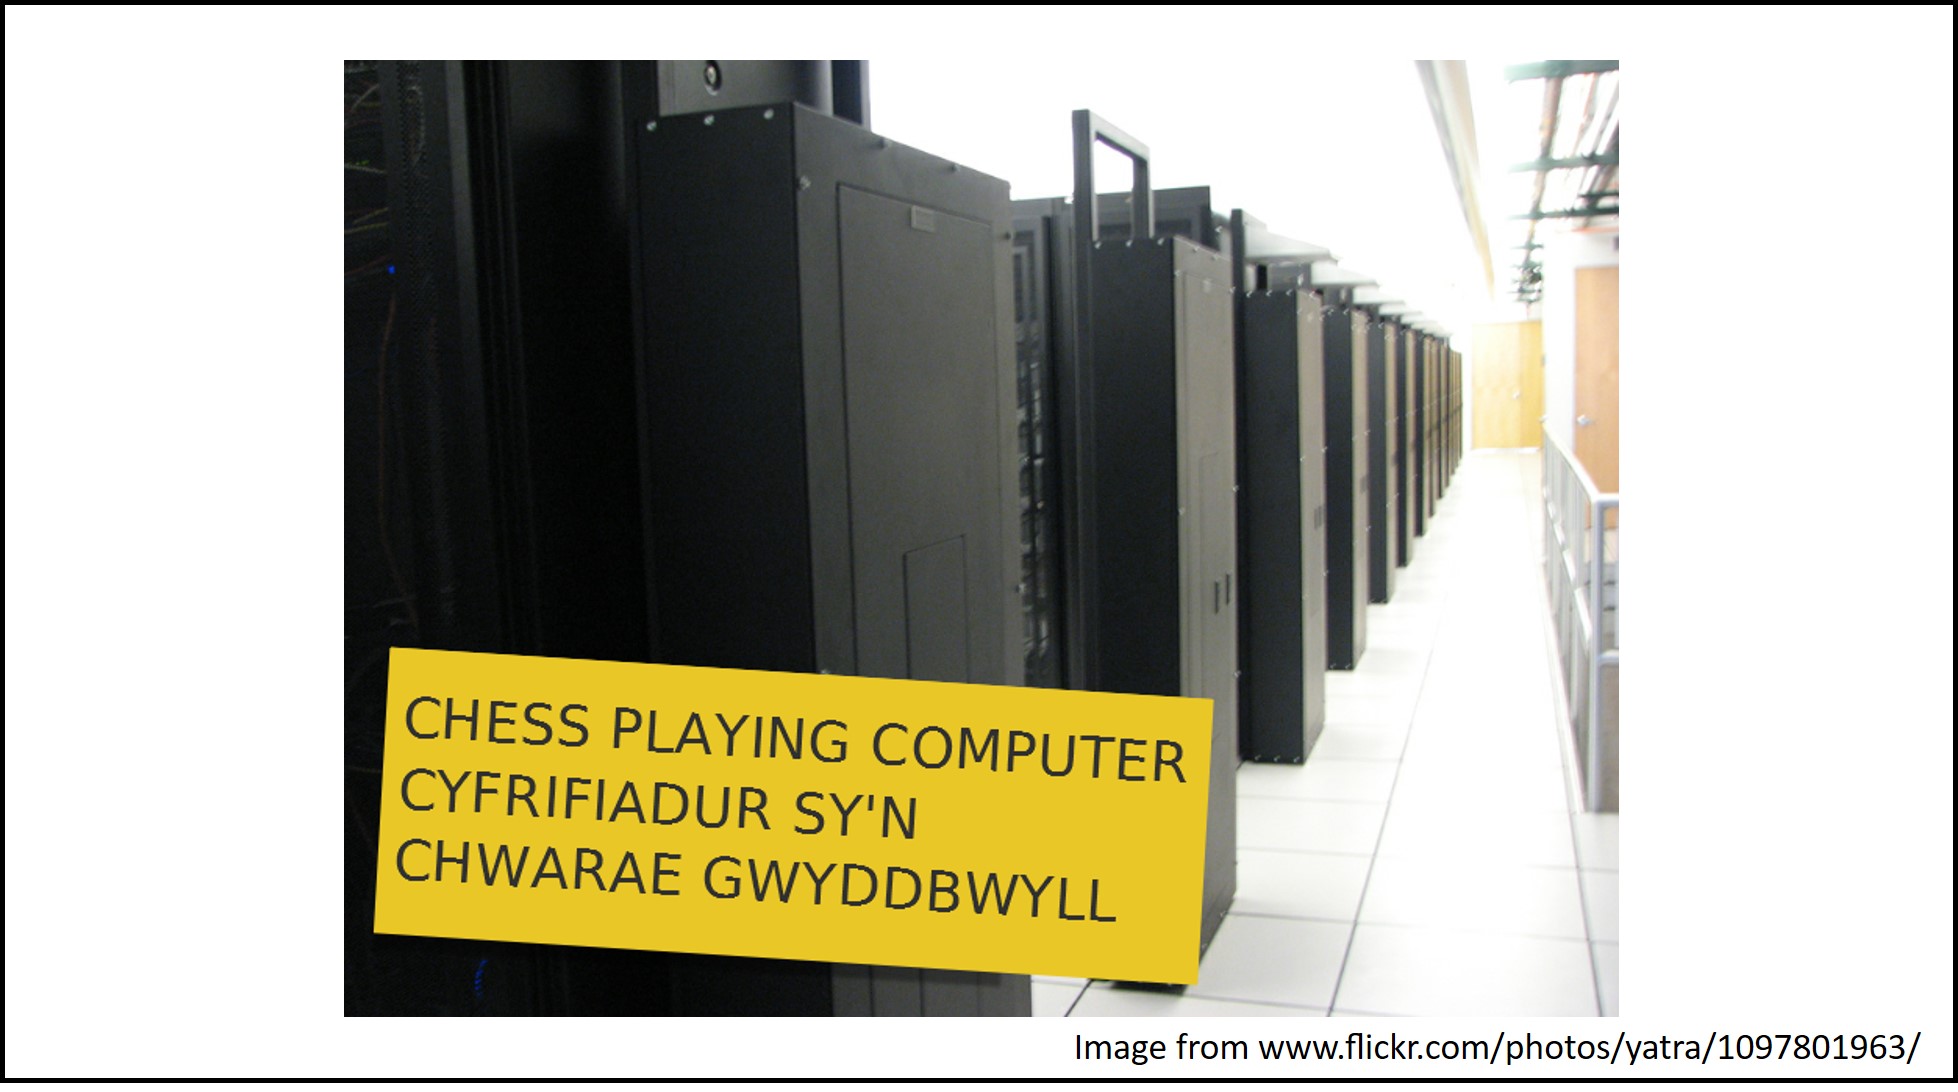 A chess playing computer